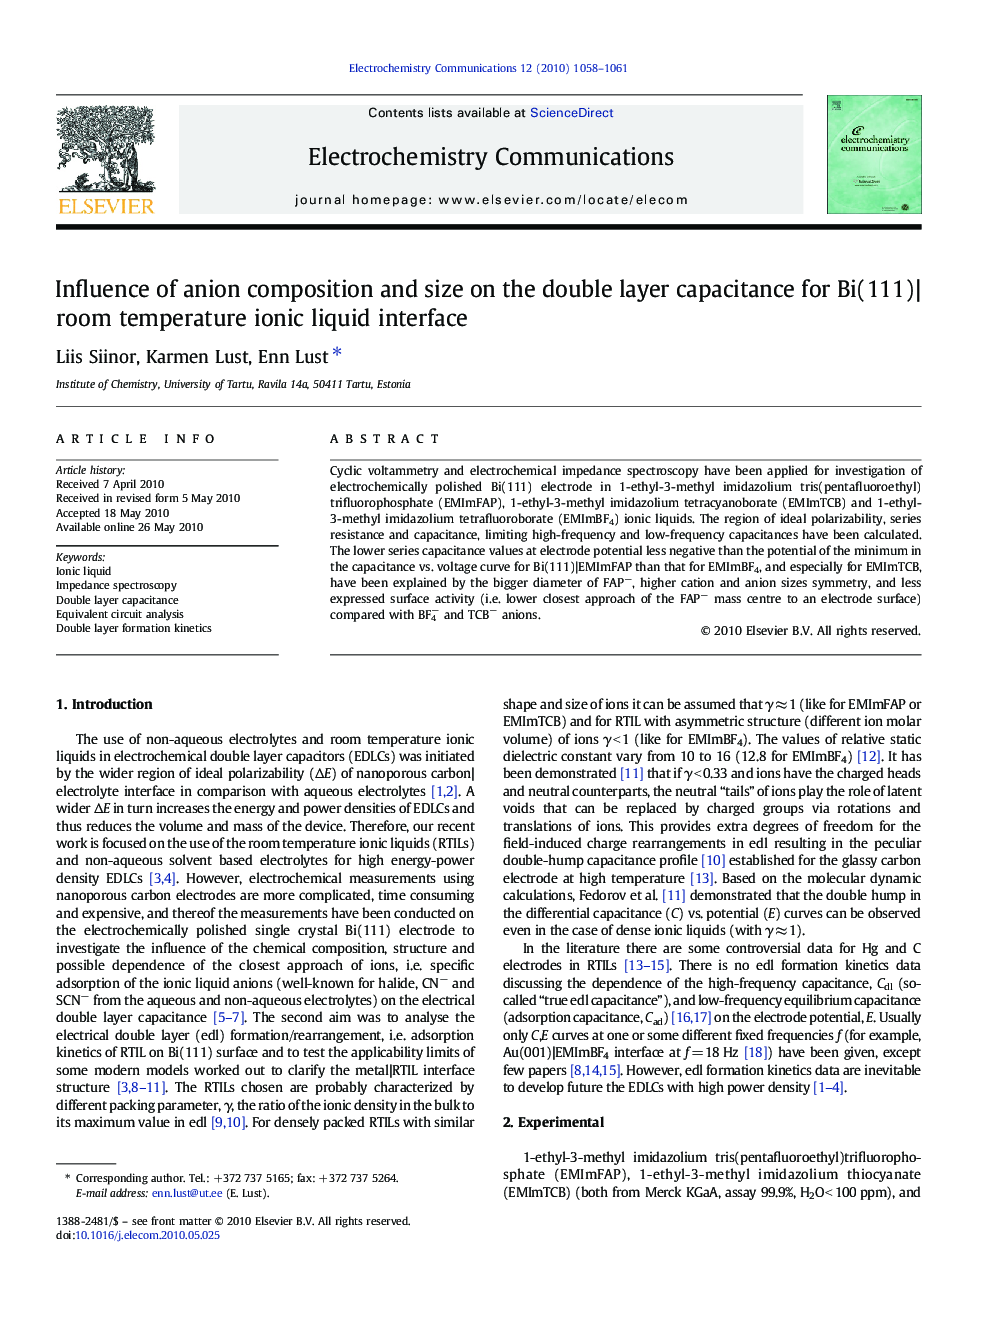 Influence of anion composition and size on the double layer capacitance for Bi(111)|room temperature ionic liquid interface